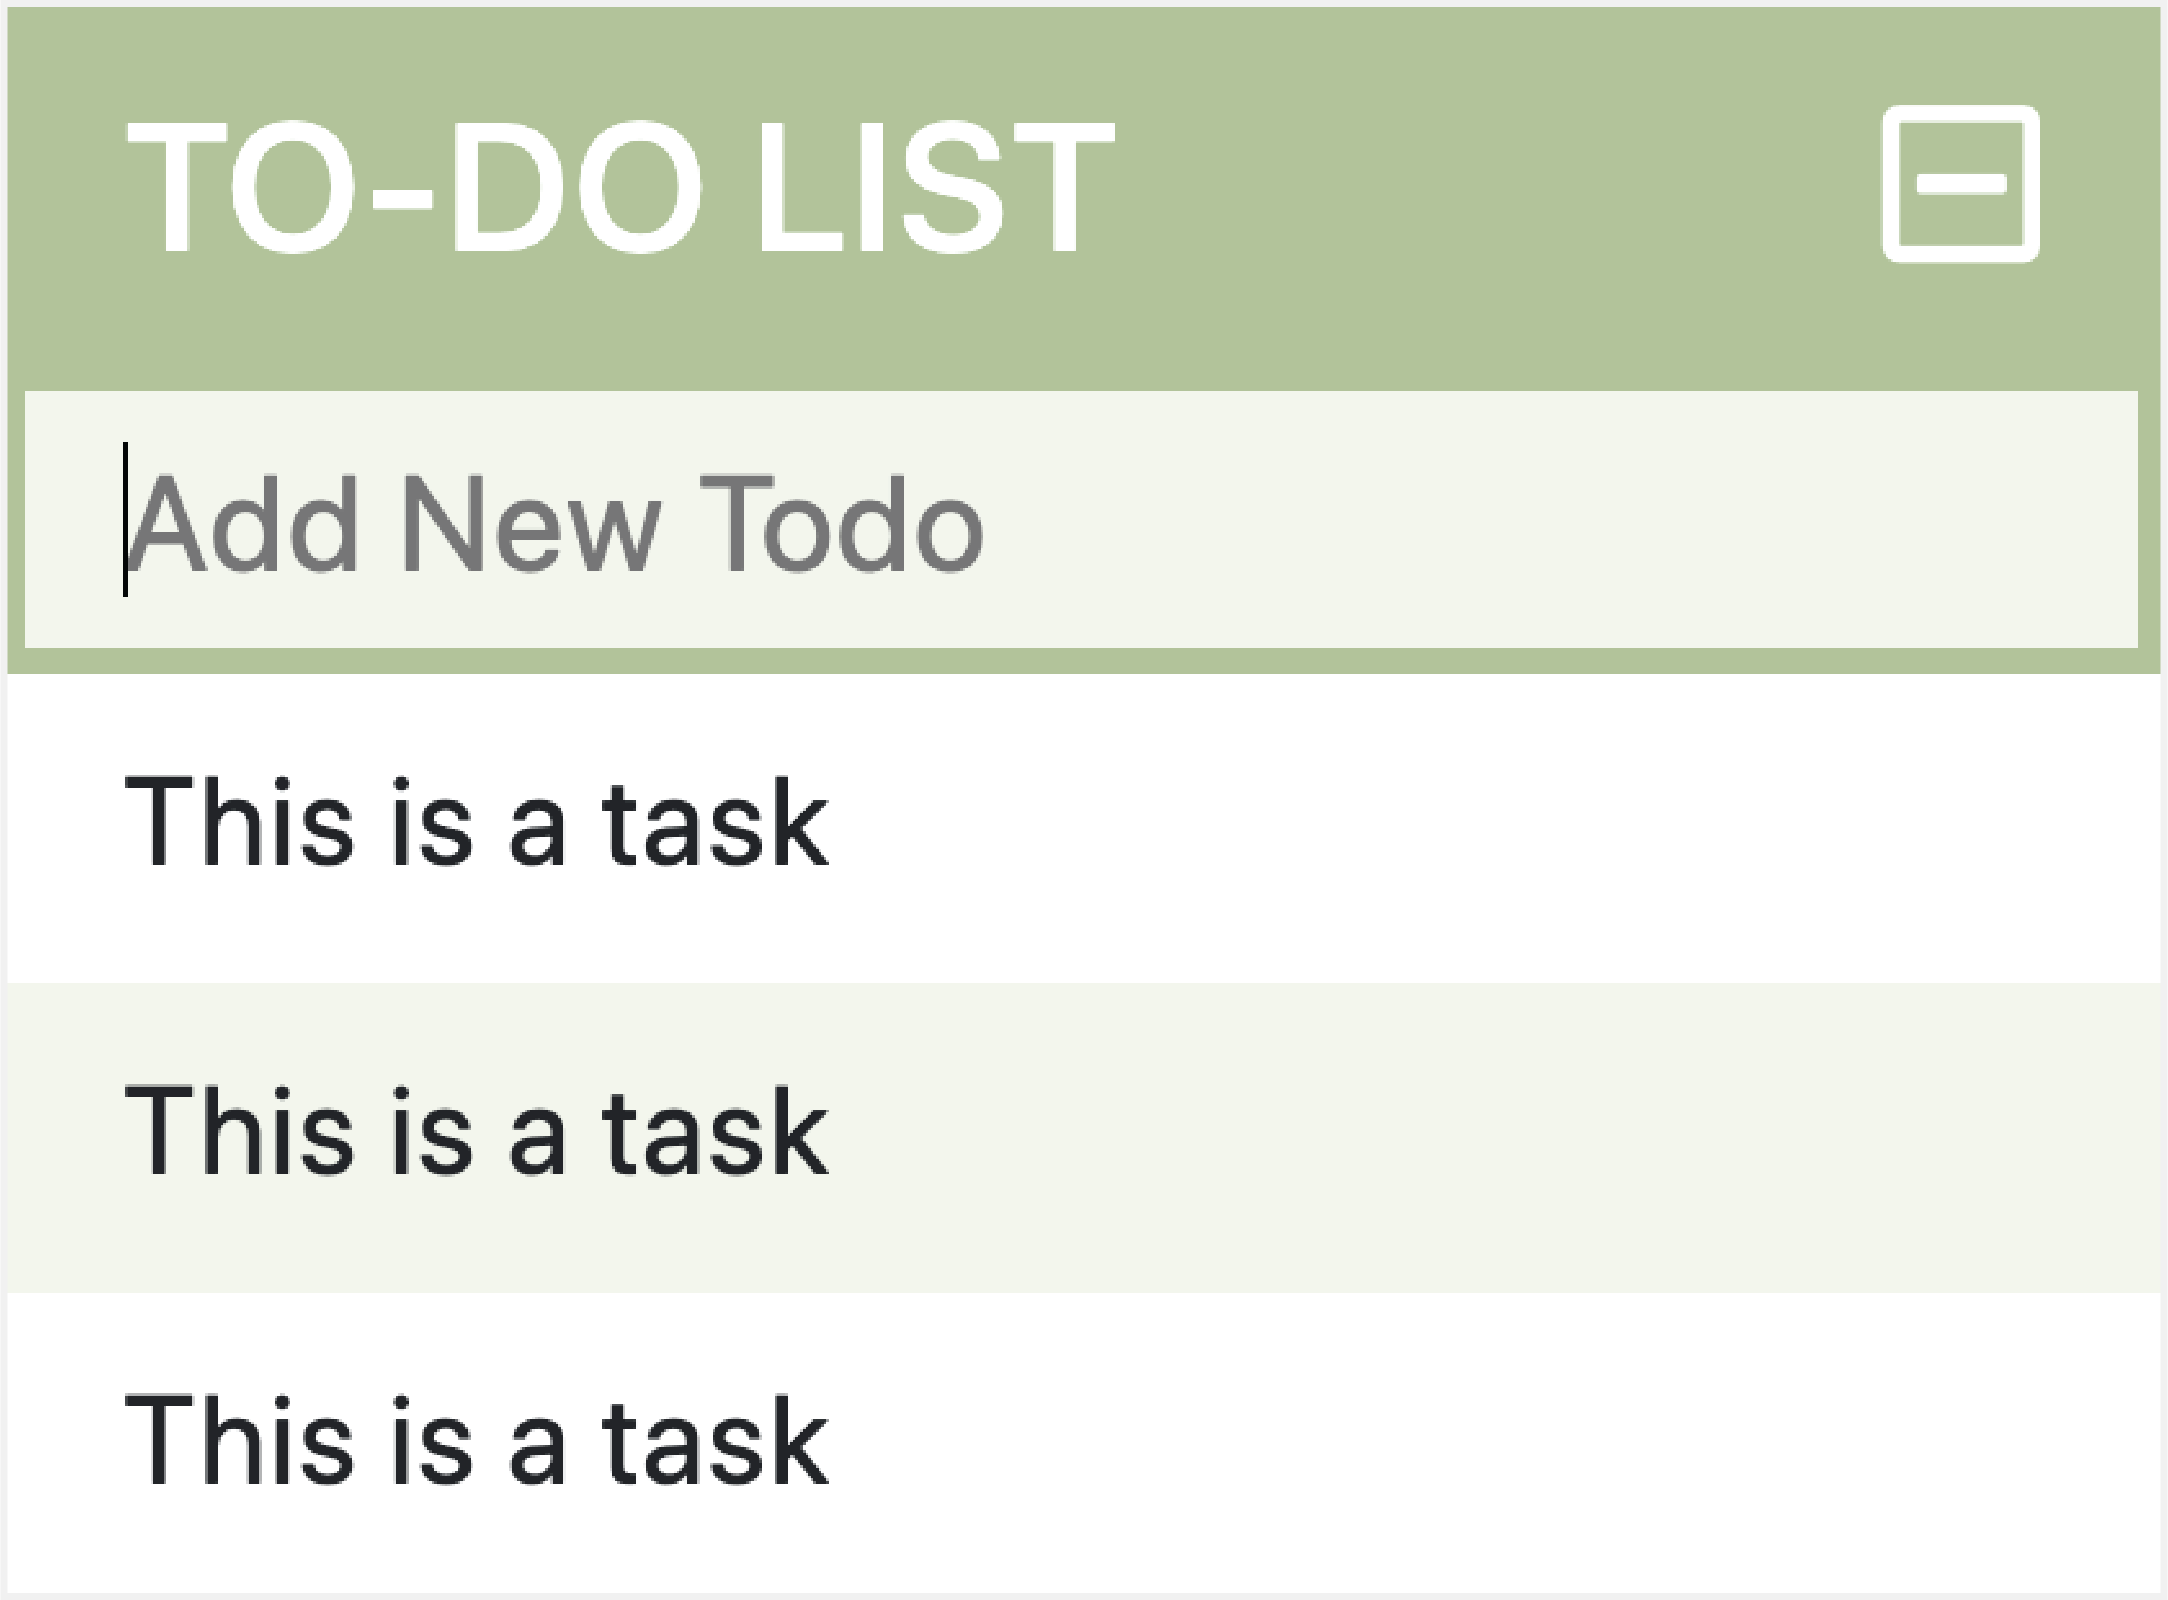 TO-DO LIST screenshot with an input box of adding new to-do